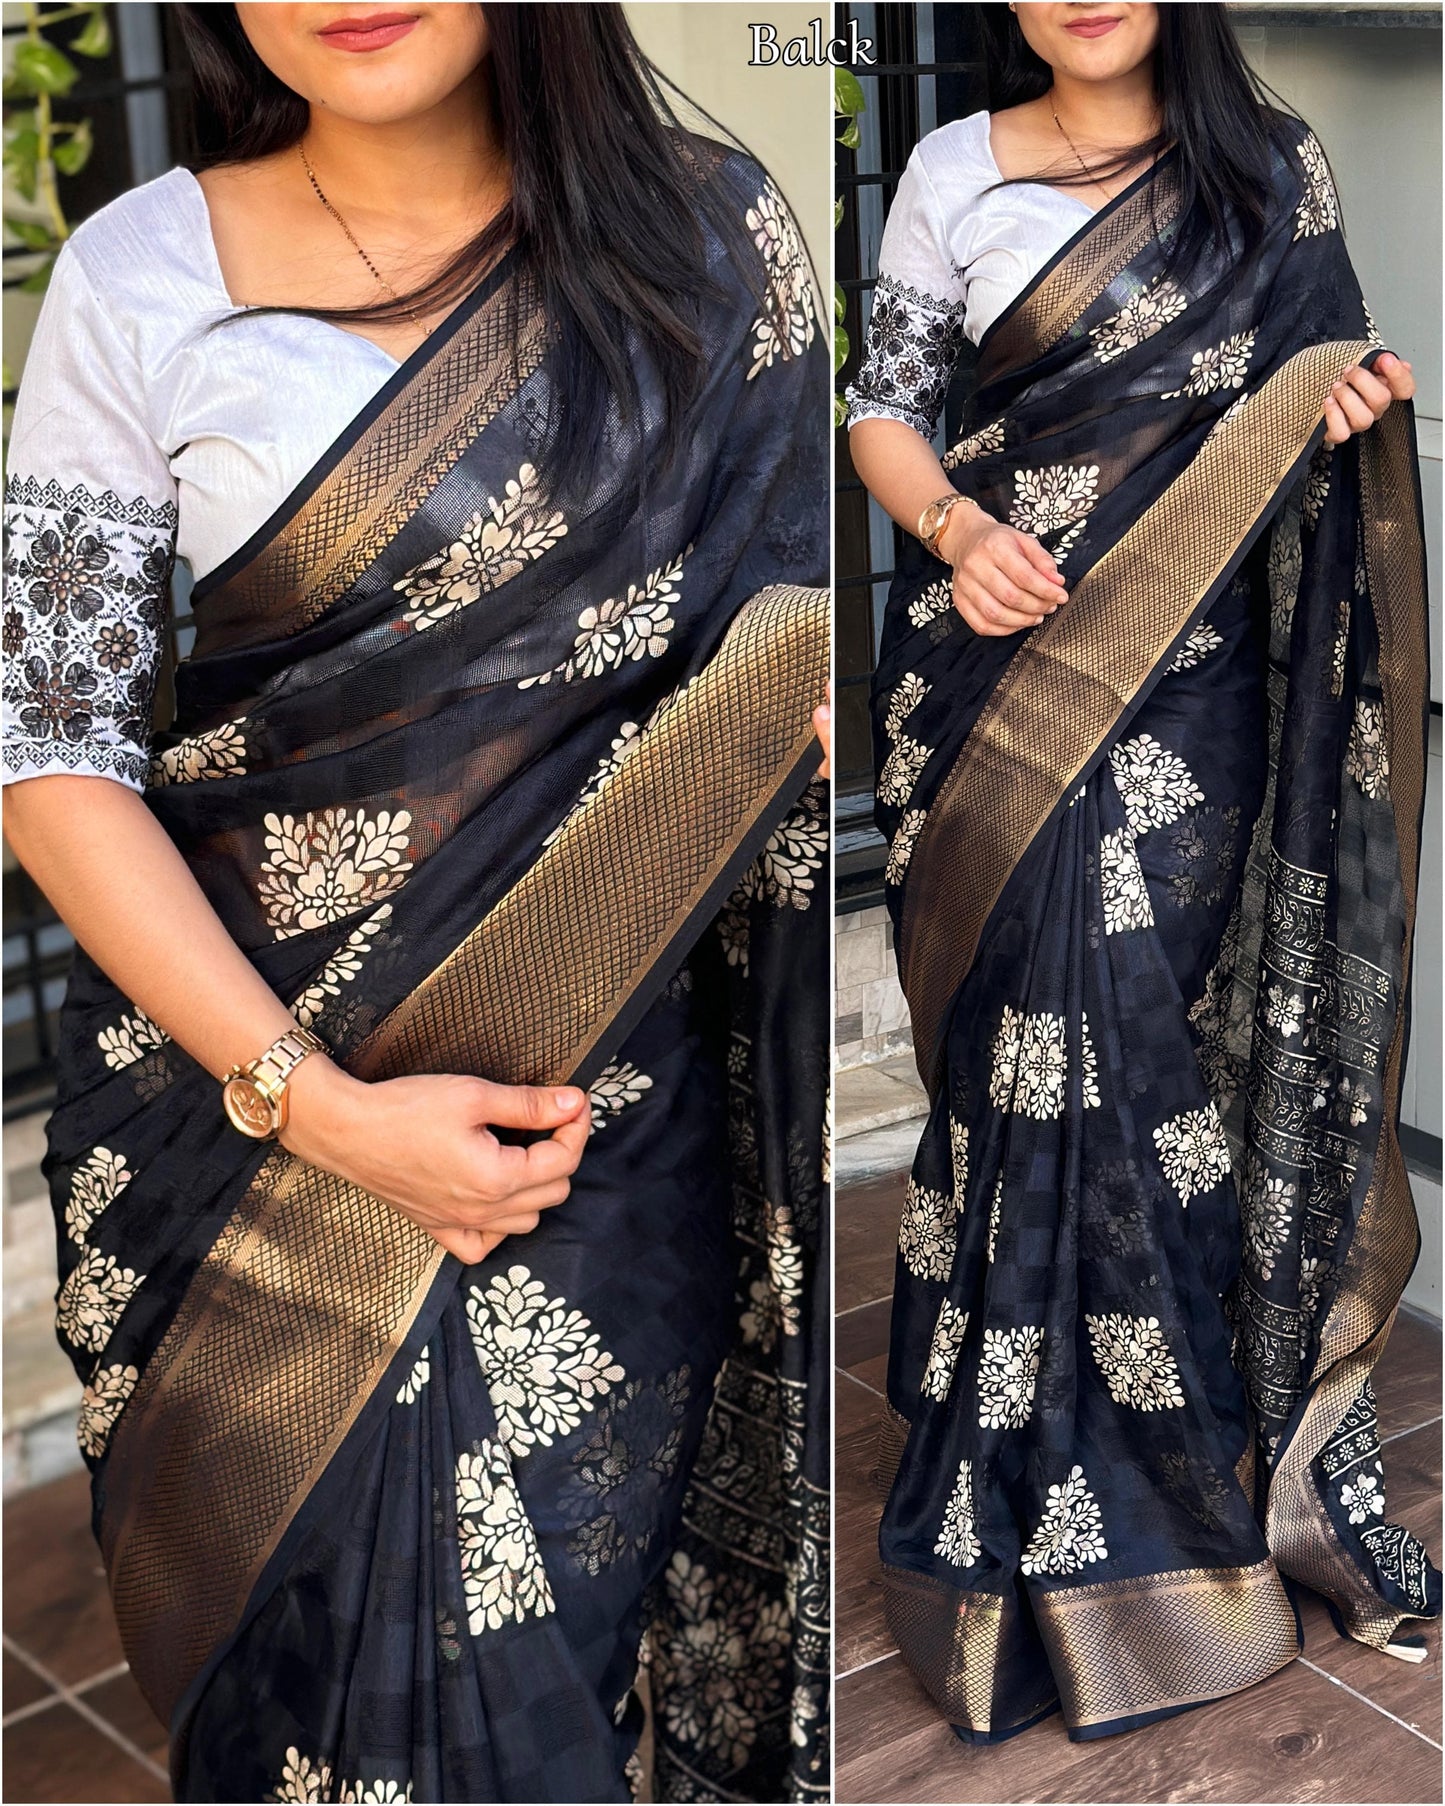 Women's Beautiful Checkered Floral  Printed Muslin Cotton Saree & Embroidered Blouse Ensemble"